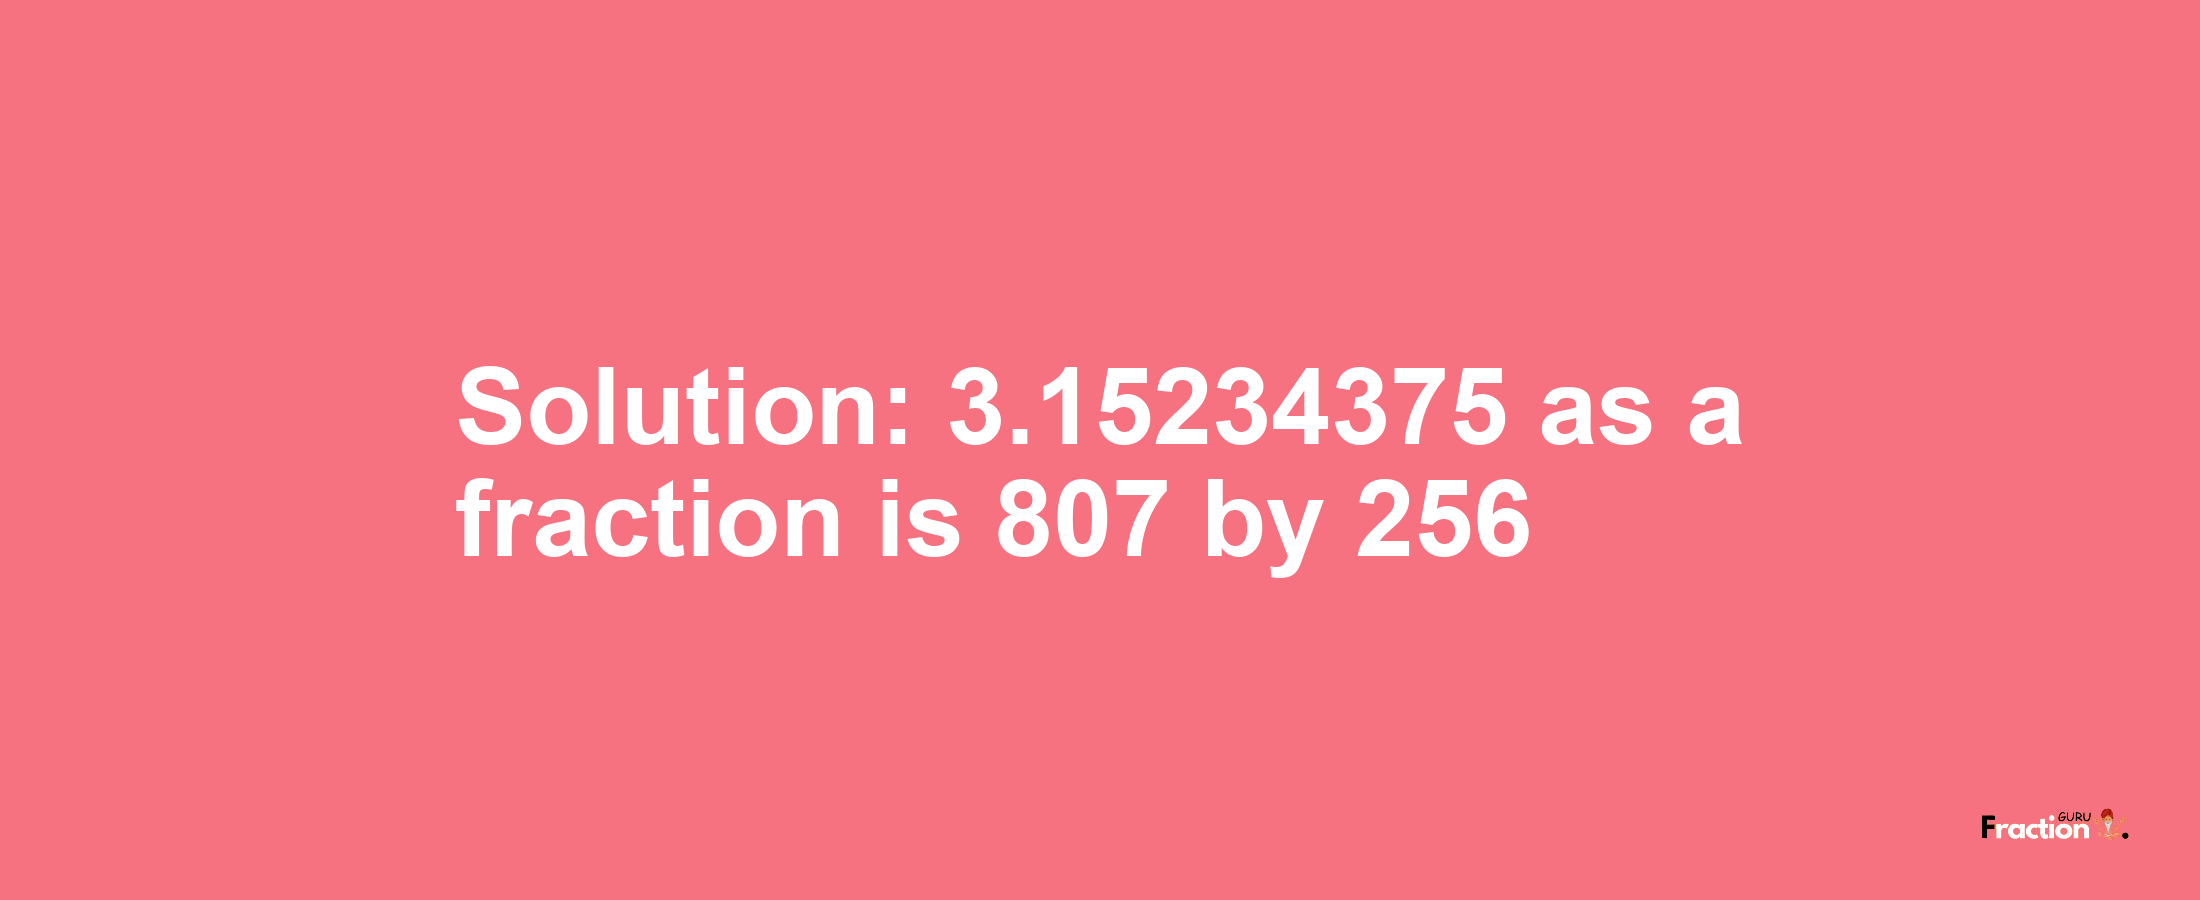 Solution:3.15234375 as a fraction is 807/256